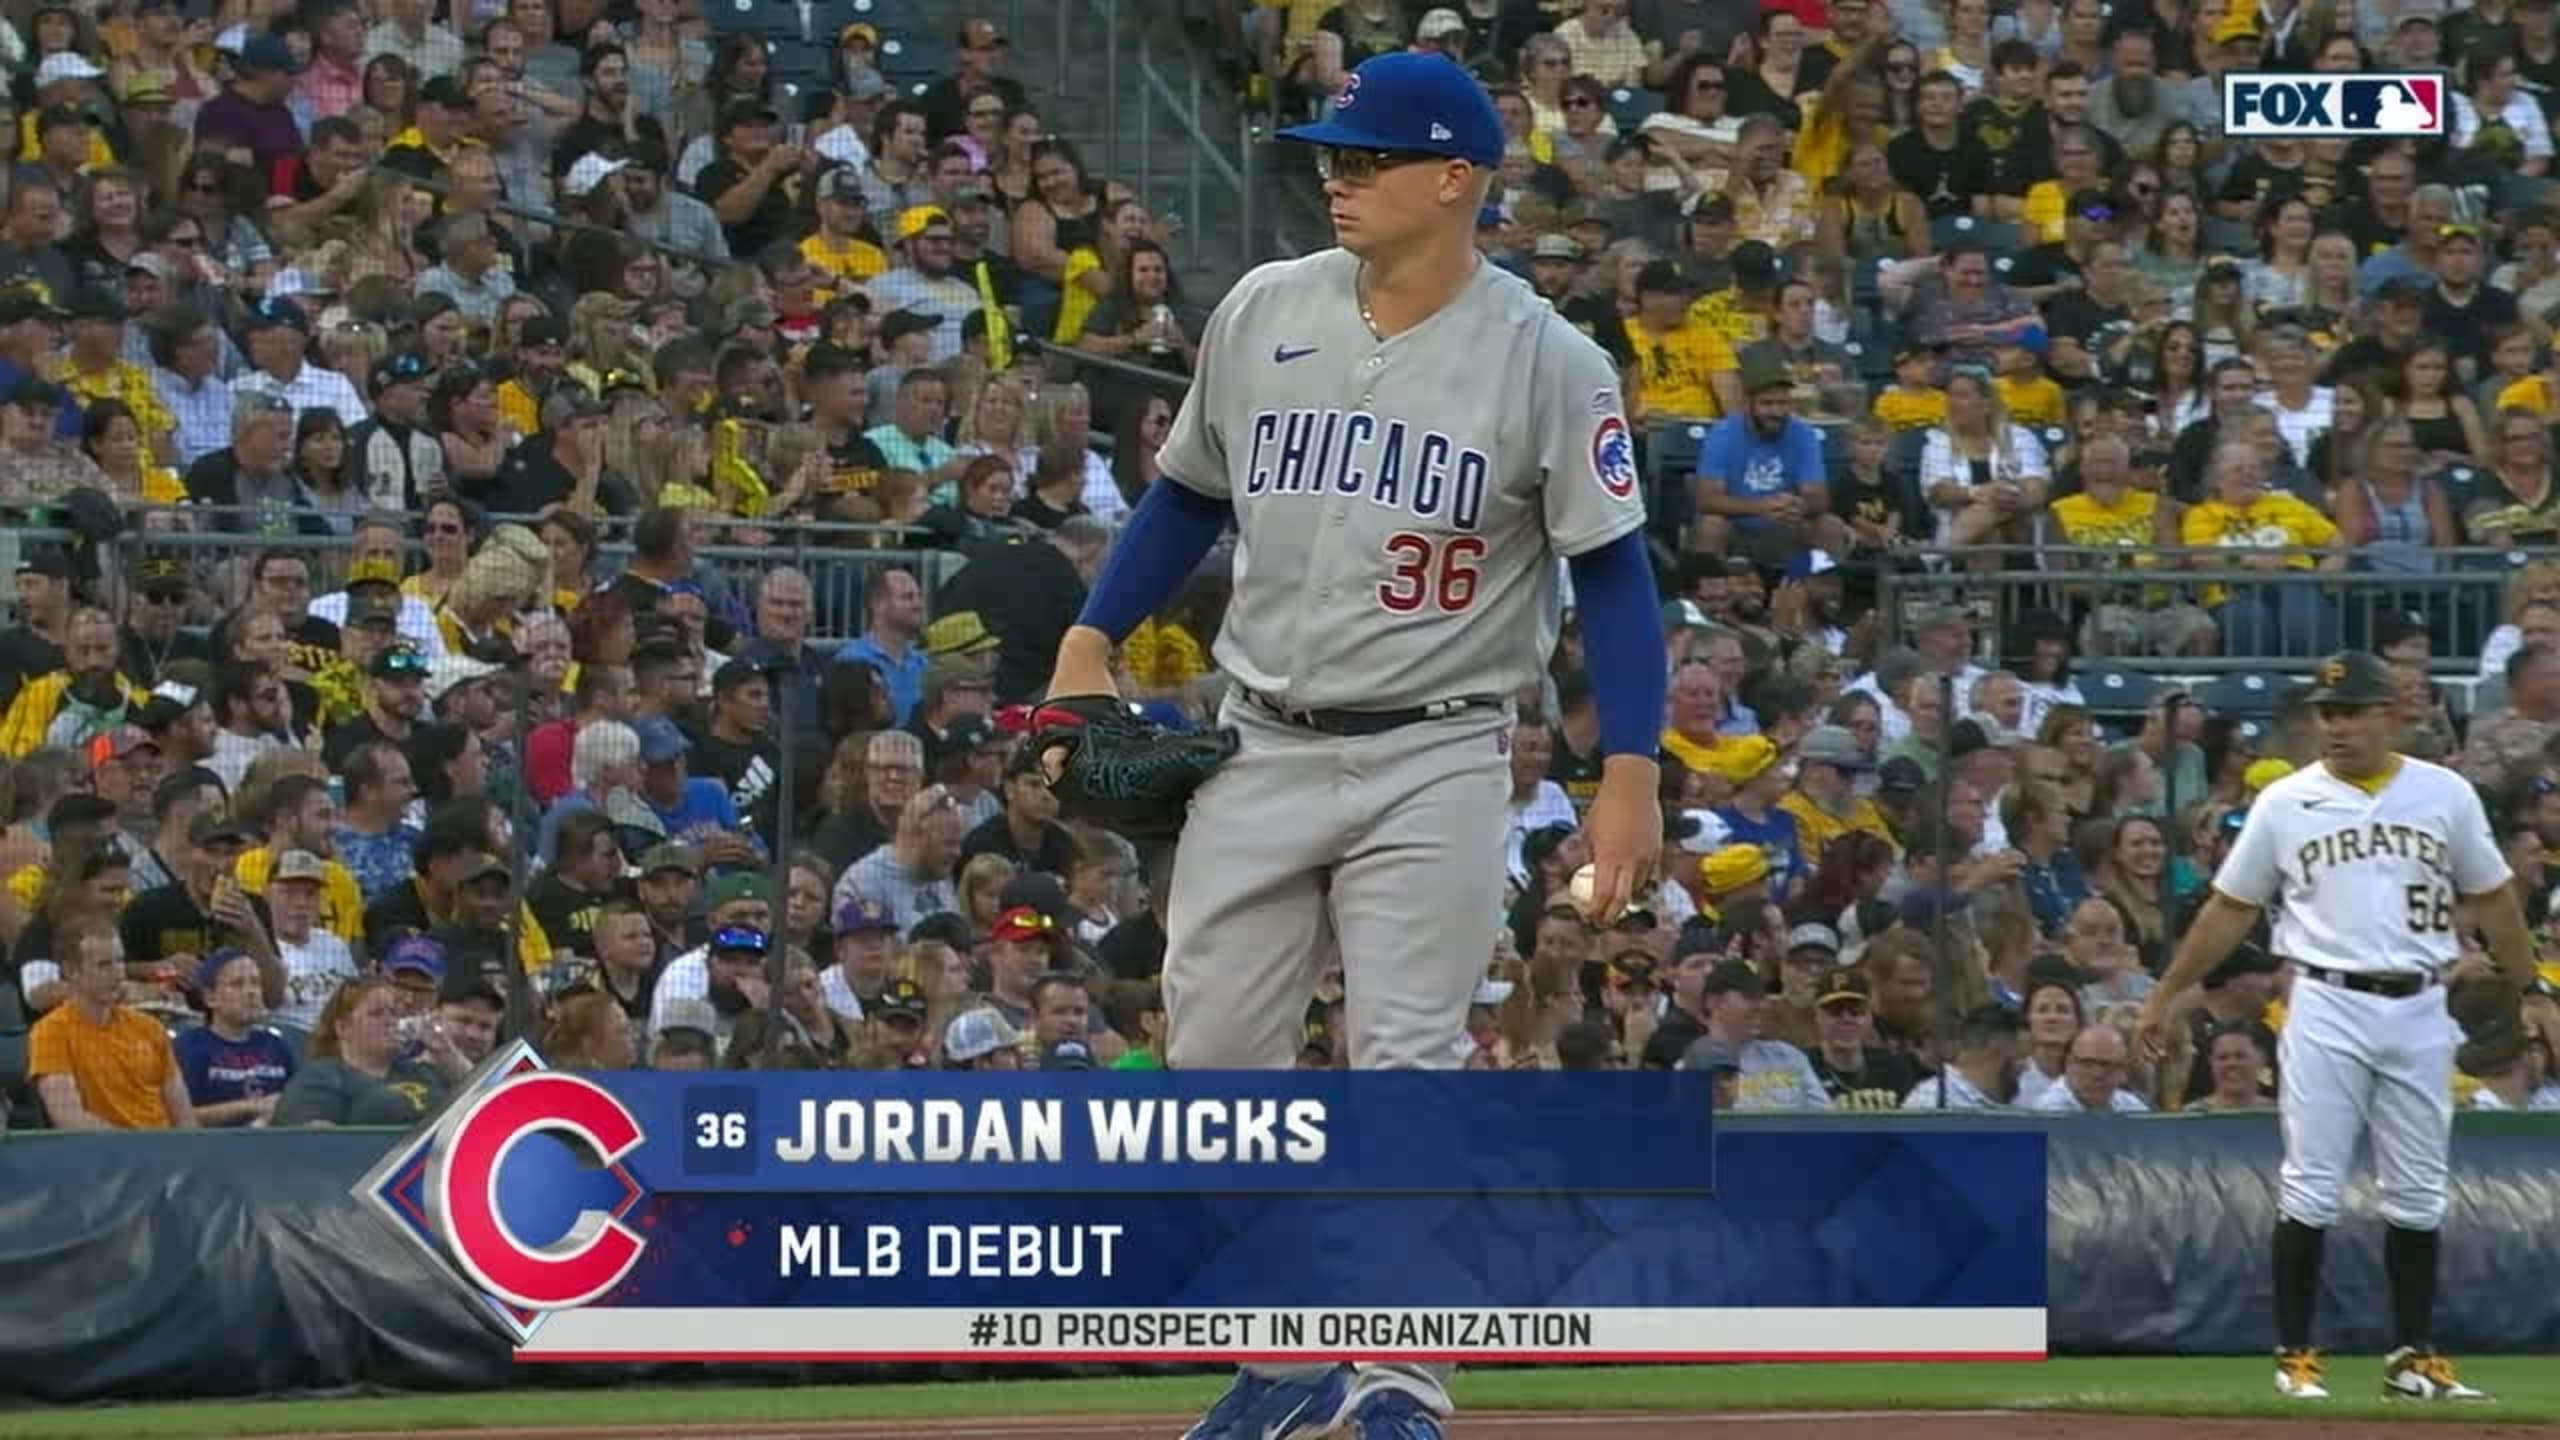 Jordan Wicks allows 2 hits and strikes out 9 in major league debut as Cubs  top Pirates 10-6